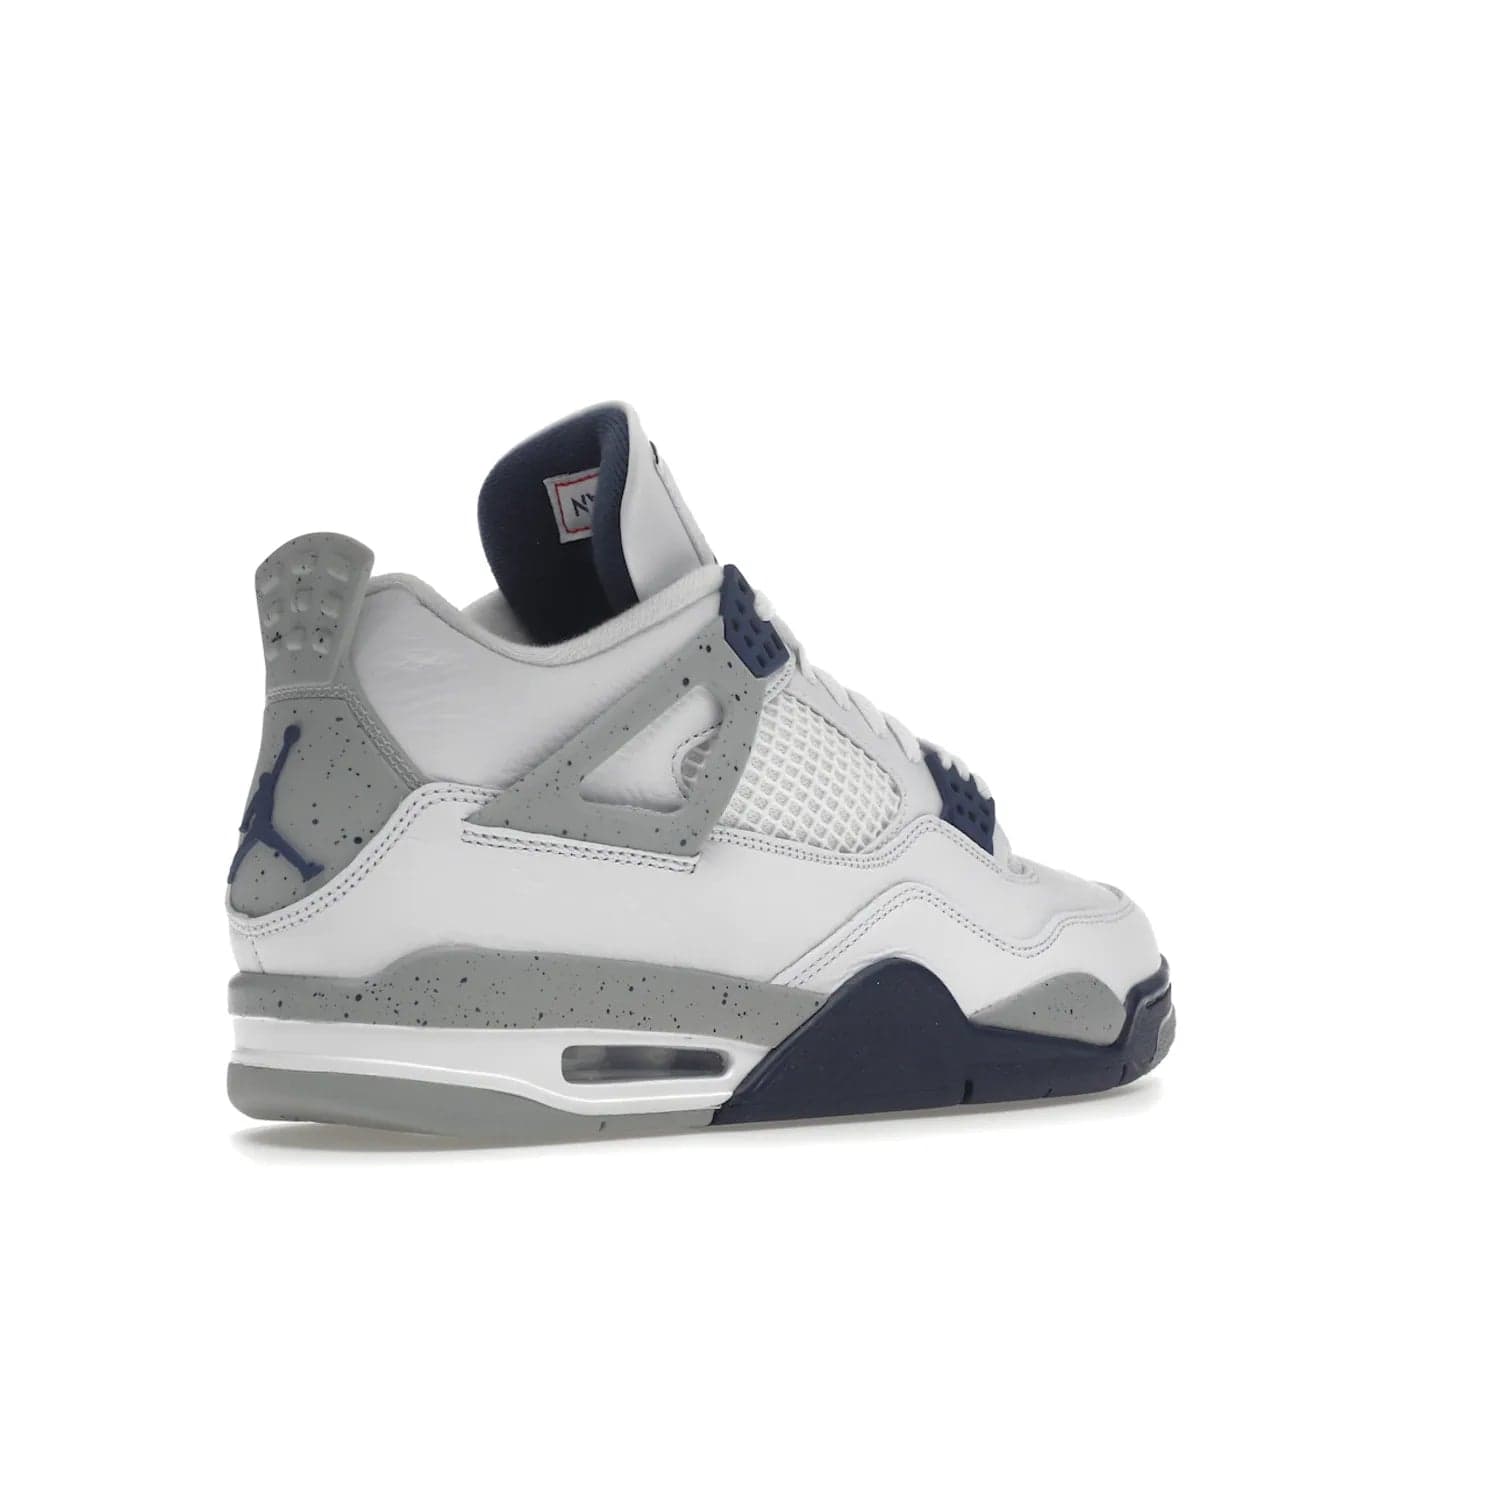 Jordan 4 Retro Midnight Navy - Image 33 - Only at www.BallersClubKickz.com - Shop the Air Jordan Retro 4 White Midnight Navy. Stand out with a classic white leather upper, black support wings, midnight navy eyelets, and Crimson Jumpman tongue tag. Unbeatable comfort with two-tone polyurethane midsole with encapsulated Air technology. Get yours before October 29th, 2022.